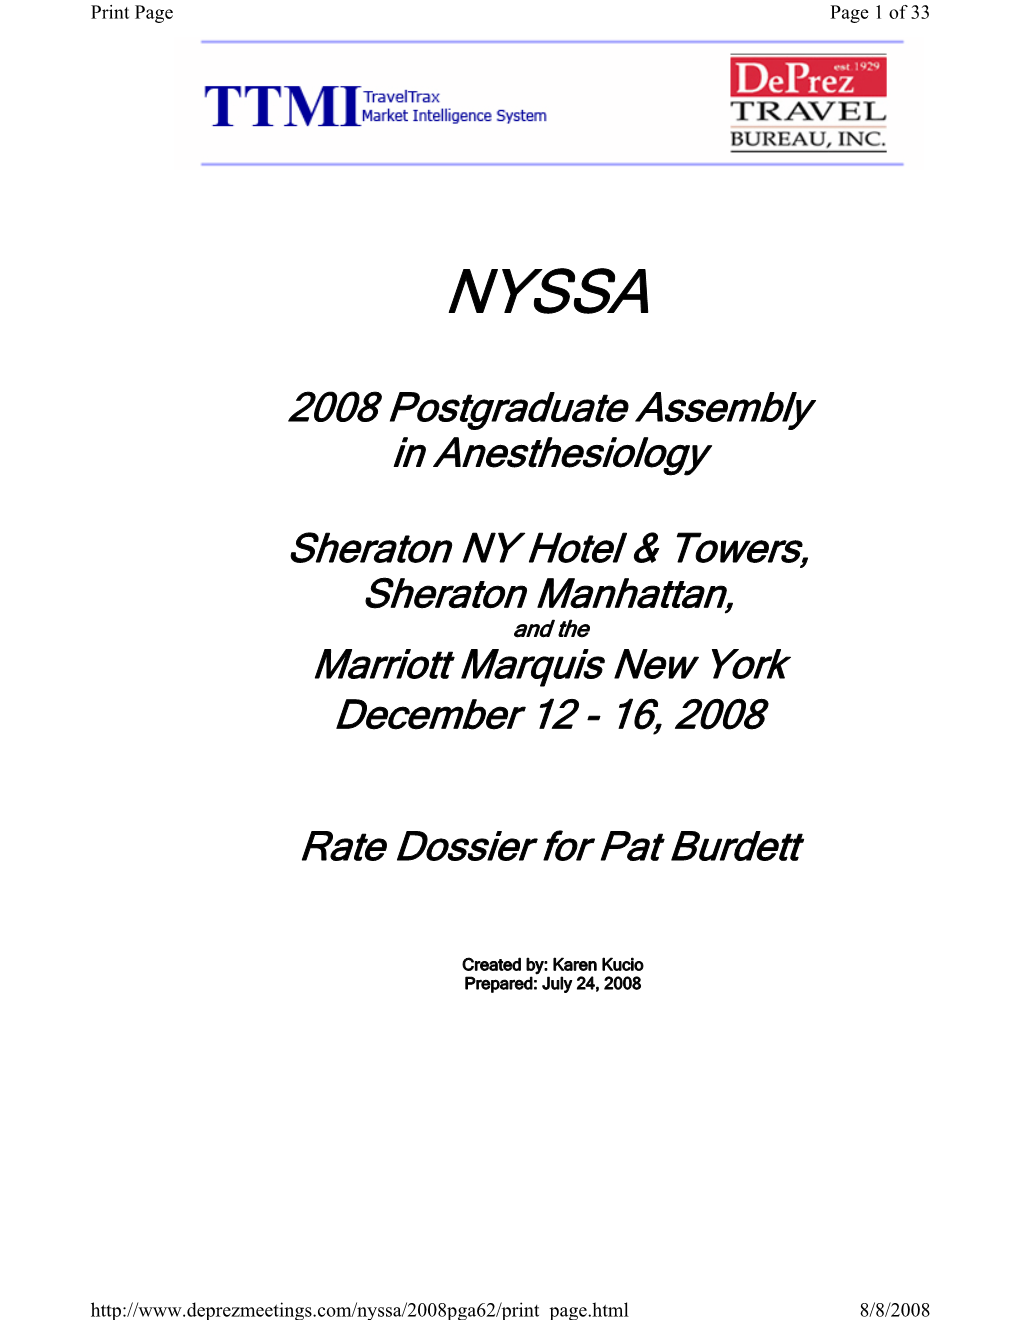 2008 Postgraduate Assembly in Anesthesiology Sheraton NY Hotel & Towers, Sheraton Manhattan, Marriott Marquis New York Dece